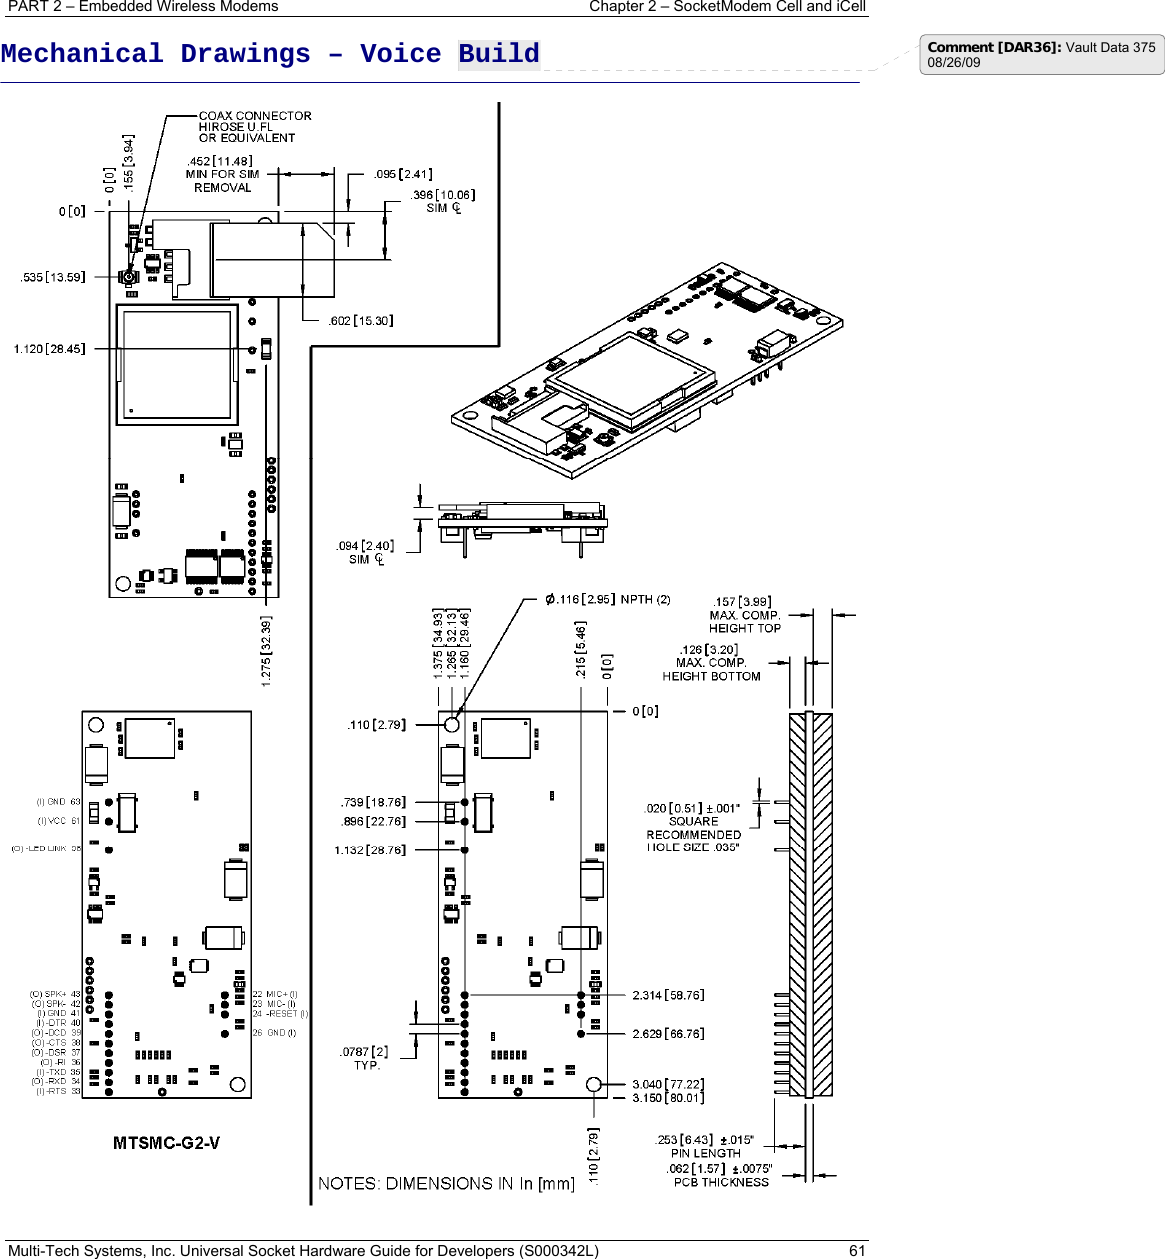 PART 2 – Embedded Wireless Modems   Chapter 2 – SocketModem Cell and iCell Multi-Tech Systems, Inc. Universal Socket Hardware Guide for Developers (S000342L)  61   Mechanical Drawings – Voice Build  Comment [DAR36]: Vault Data 375 08/26/09 